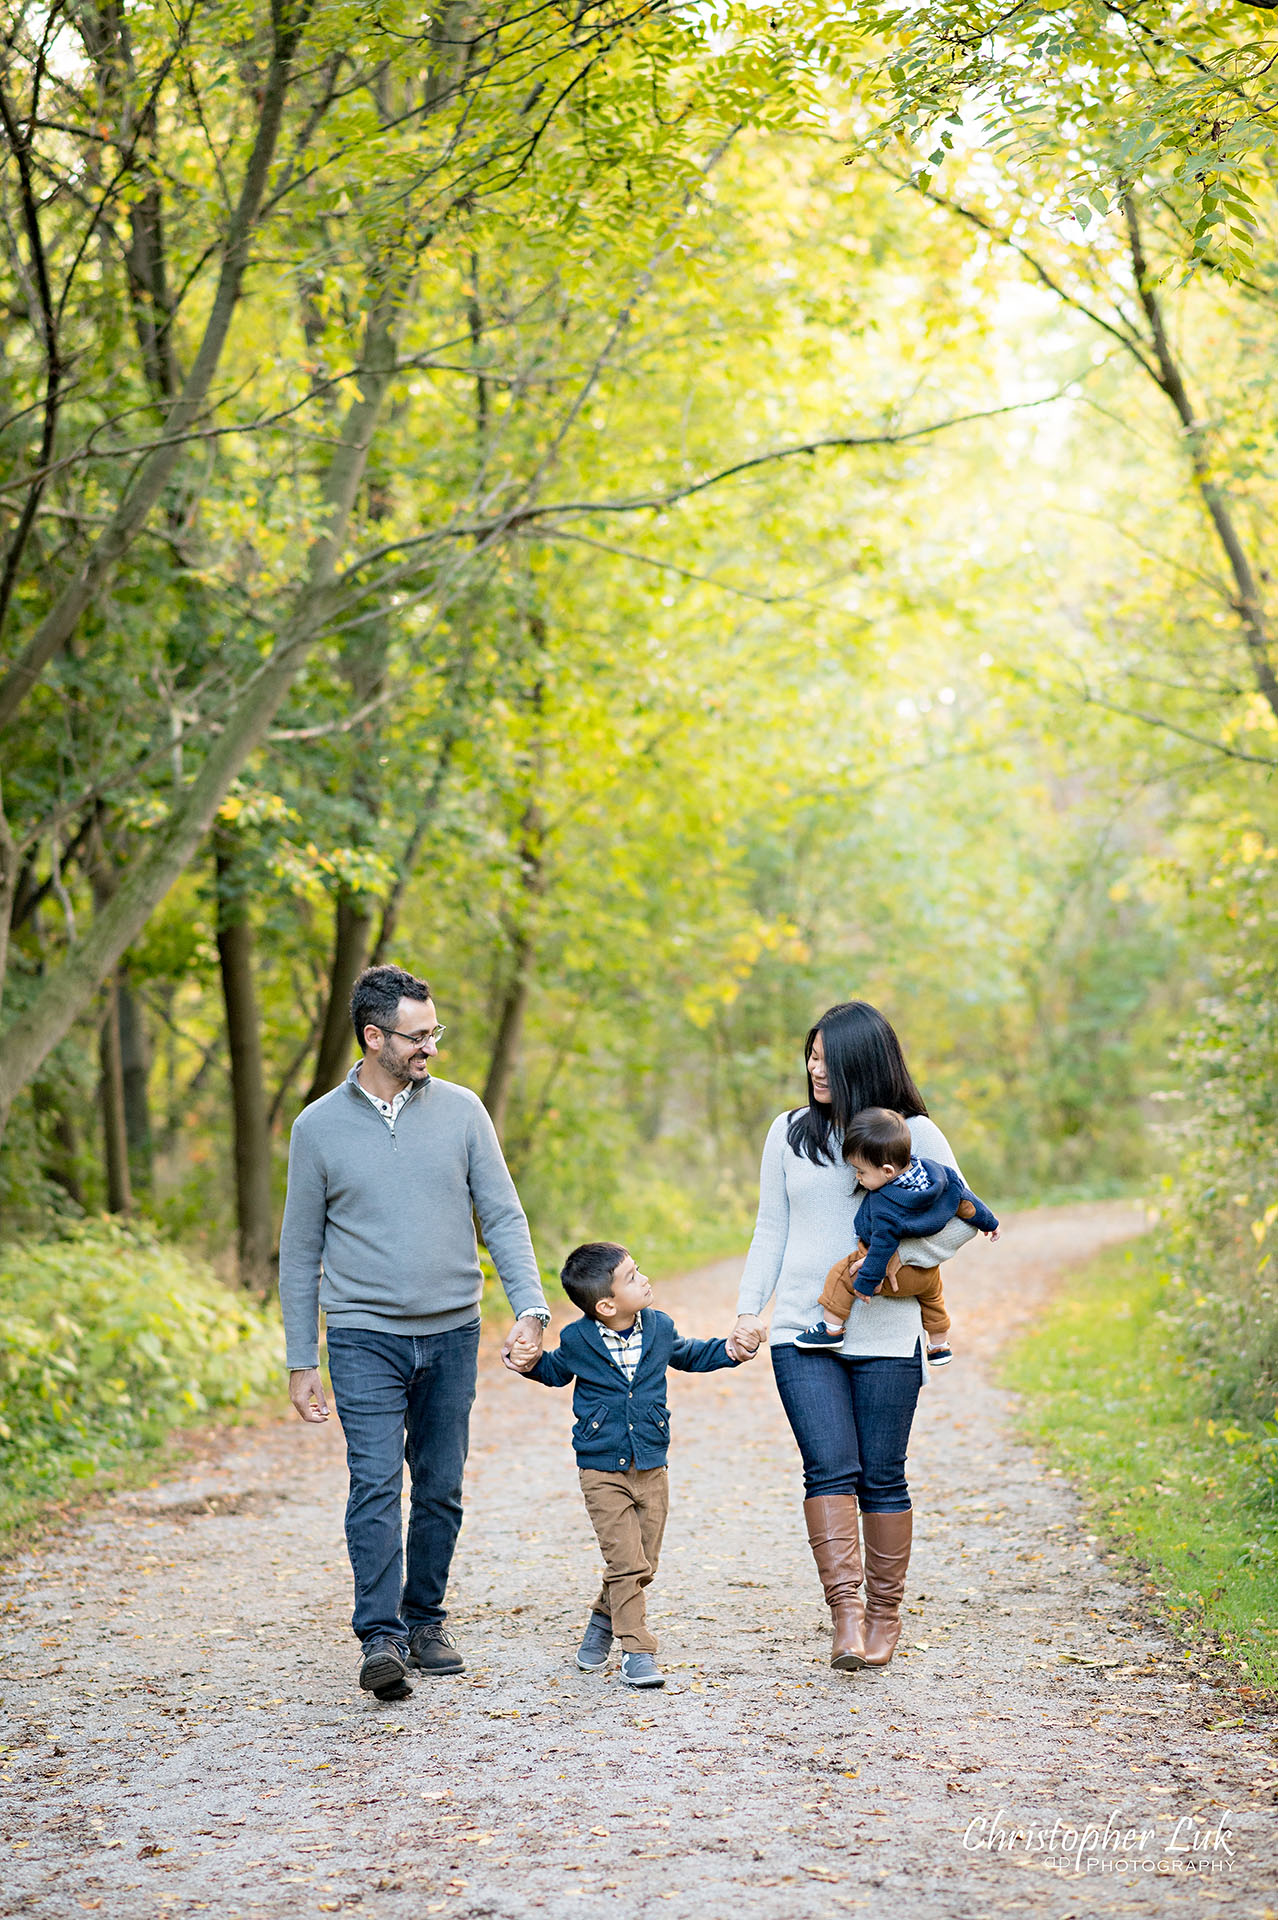 Christopher Luk Family Photographer Toronto Markham Unionville Autumn Fall Leaves Natural Candid Photojournalistic Sons Brothers Baby Boys Father Dad Mother Mom Motherhood Fatherhood Holding Hands Walking Together Trail Pathway Forest Smile